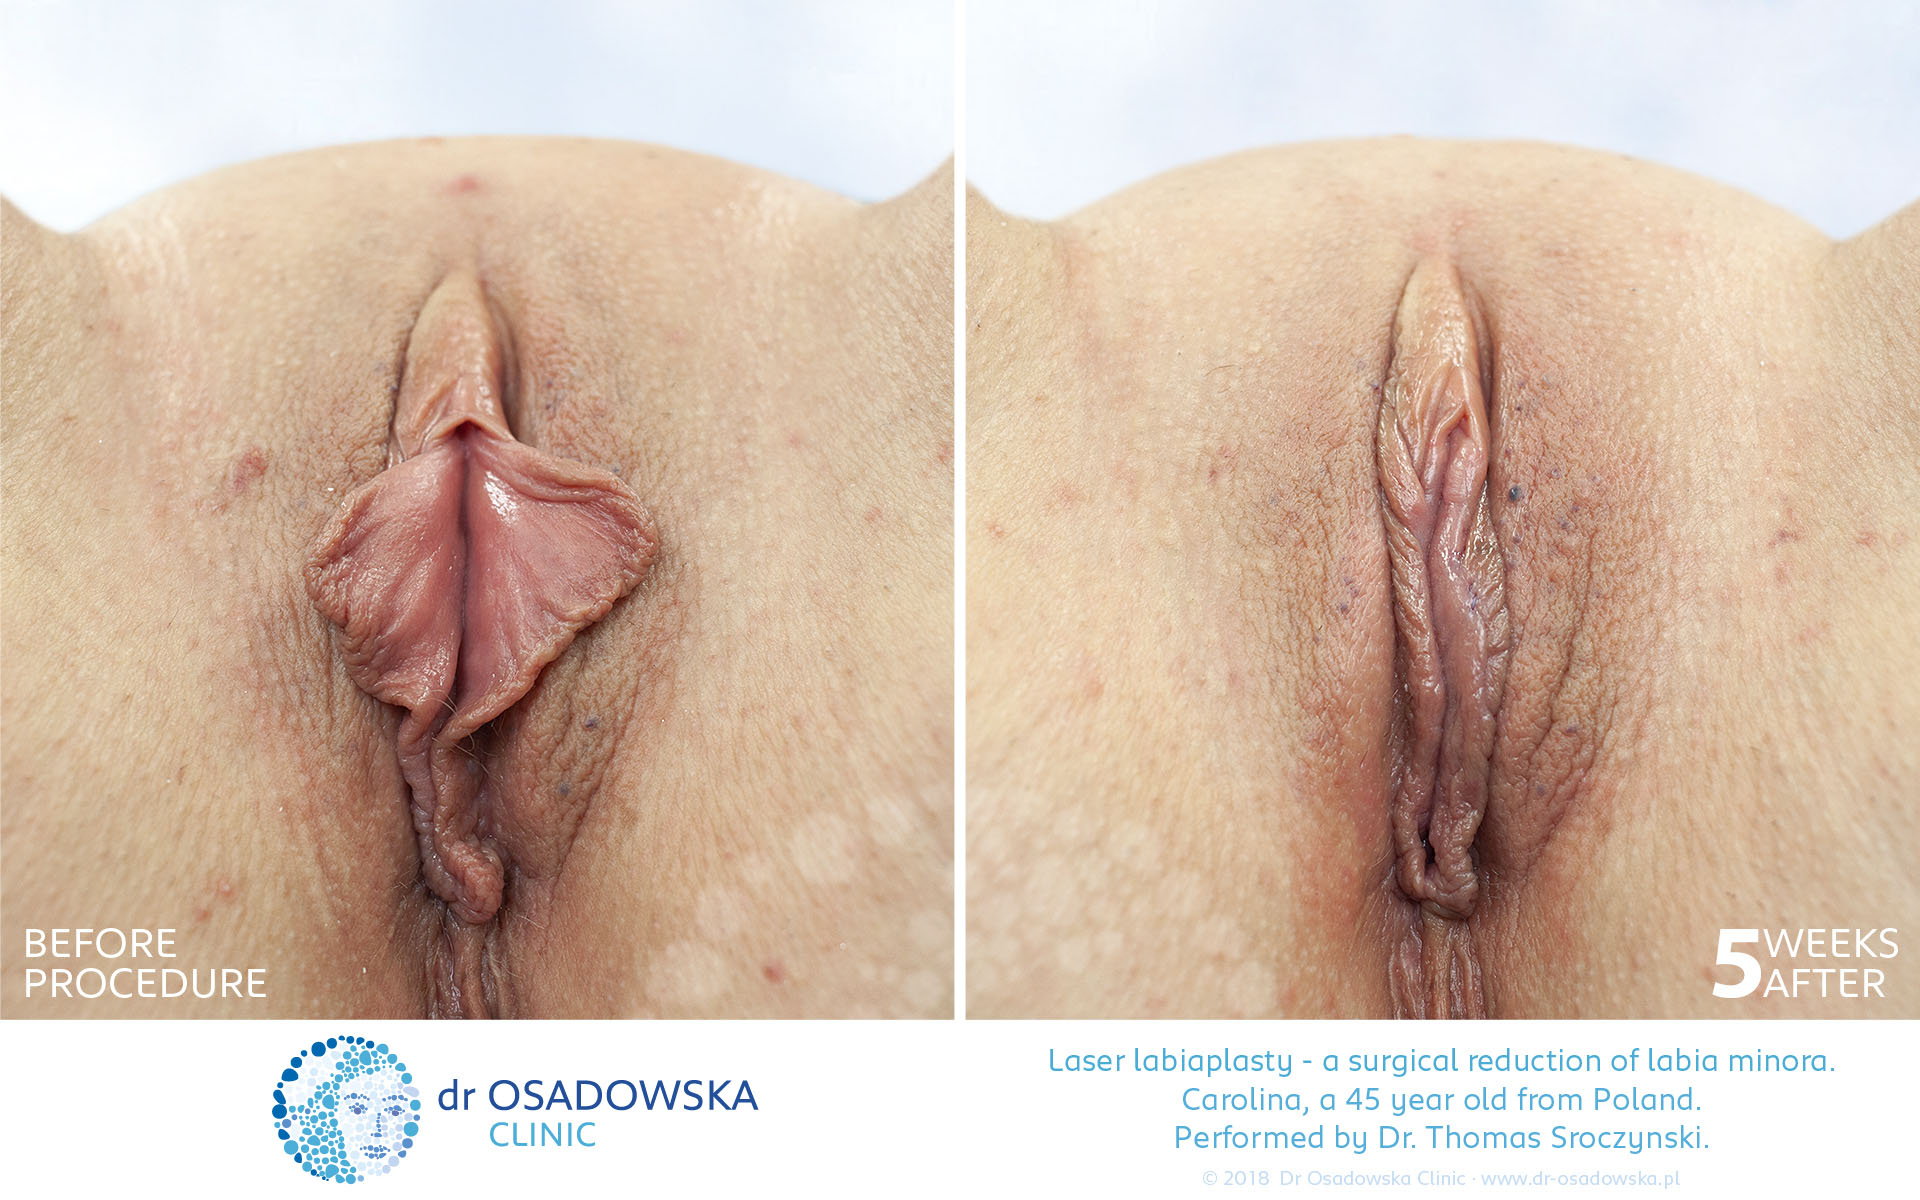 Laser Labiaplasty before and 5 weeks after. Carolina, 45 y.o. from Poland